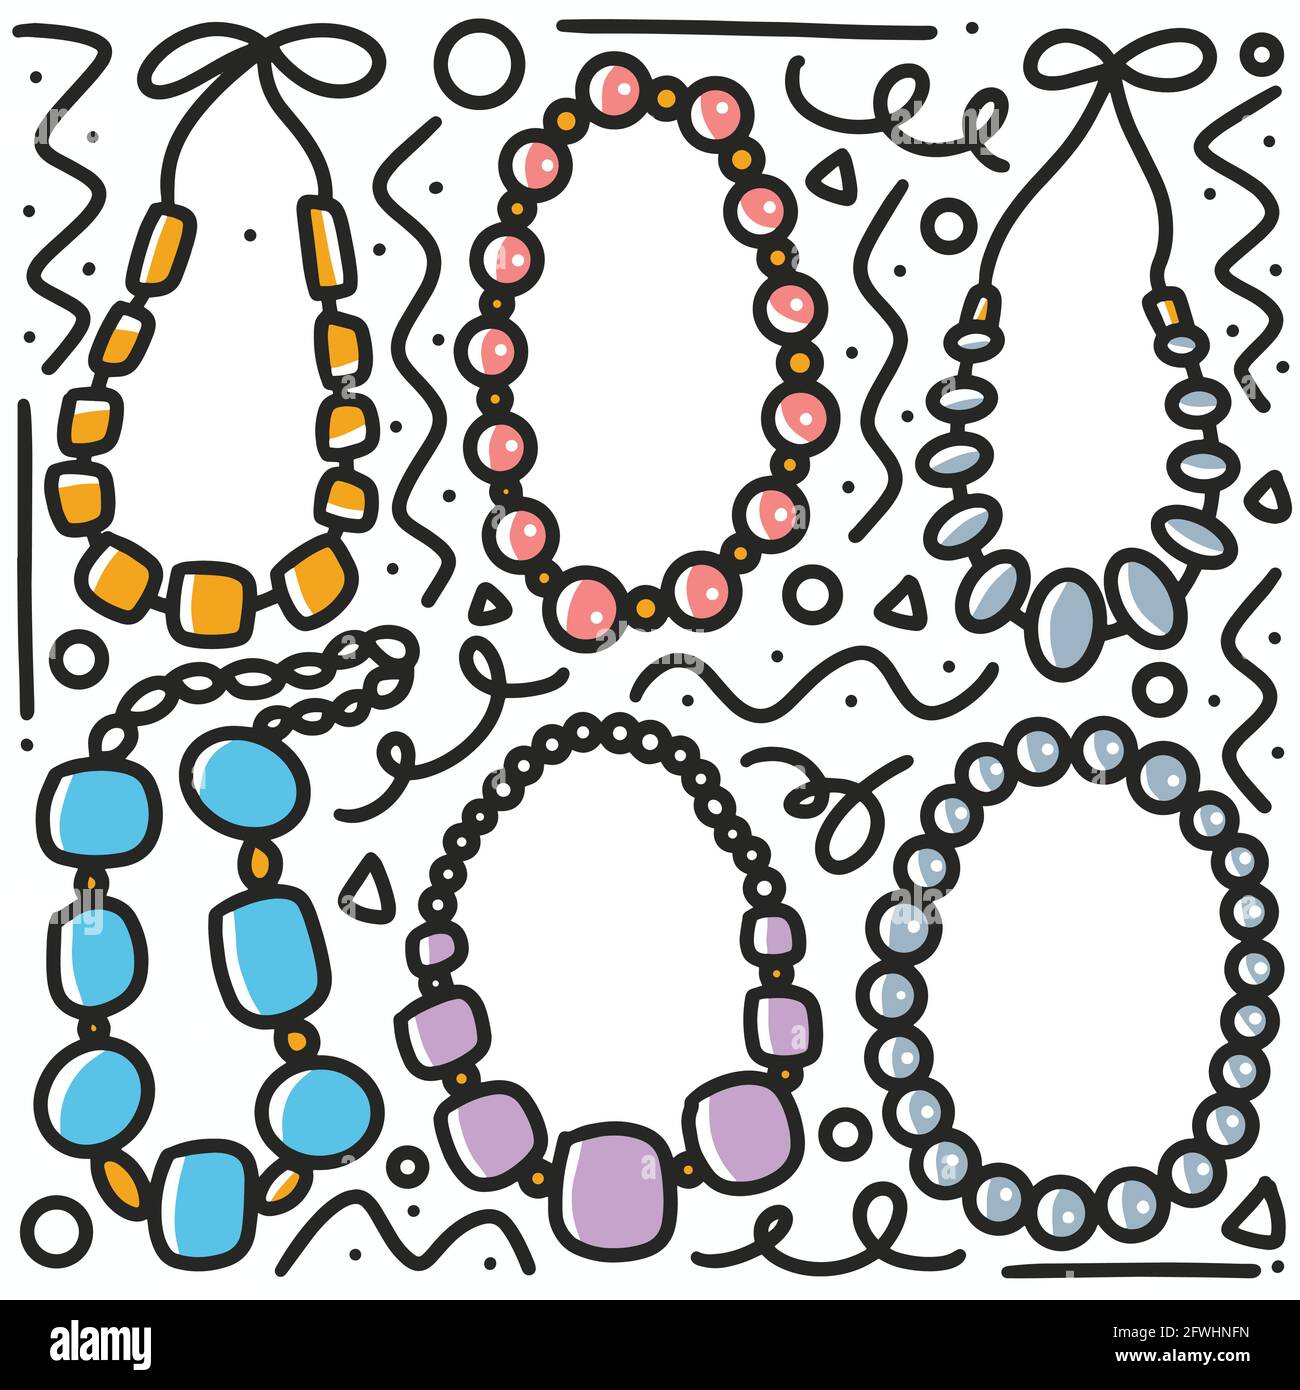 Necklace Icon PNG Images, Vectors Free Download - Pngtree